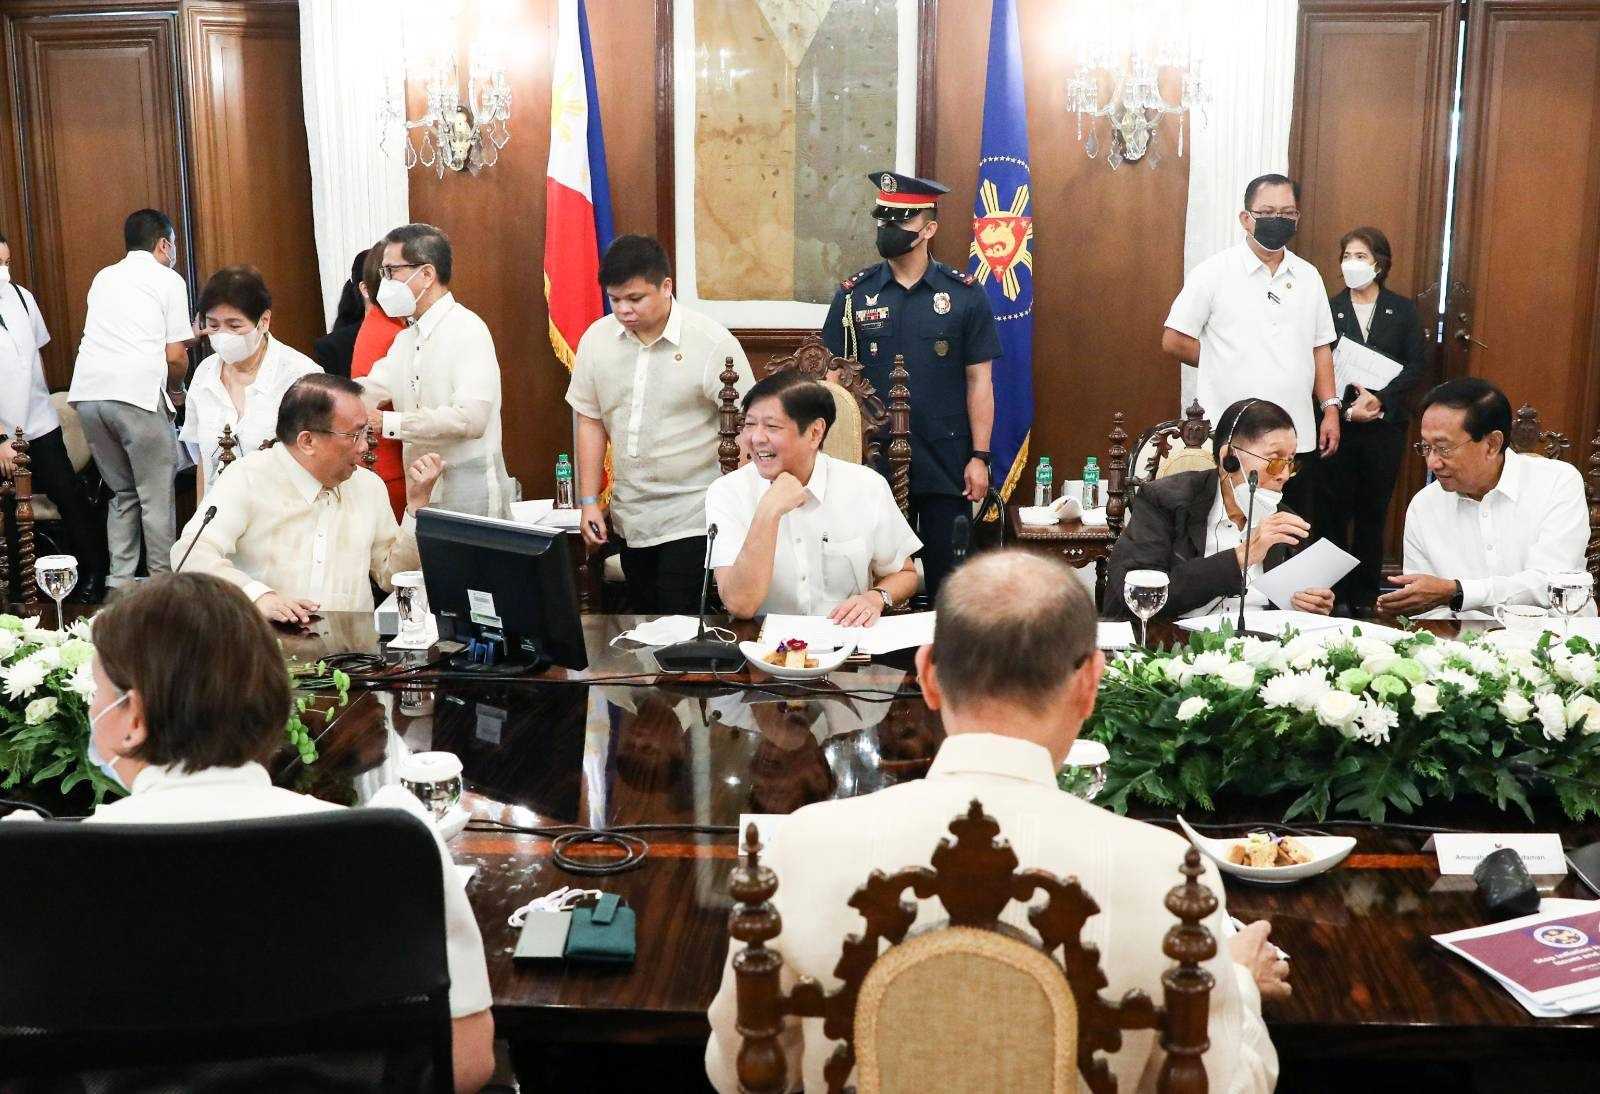 First 100 Days: Who are the members of PBBM's Cabinet?